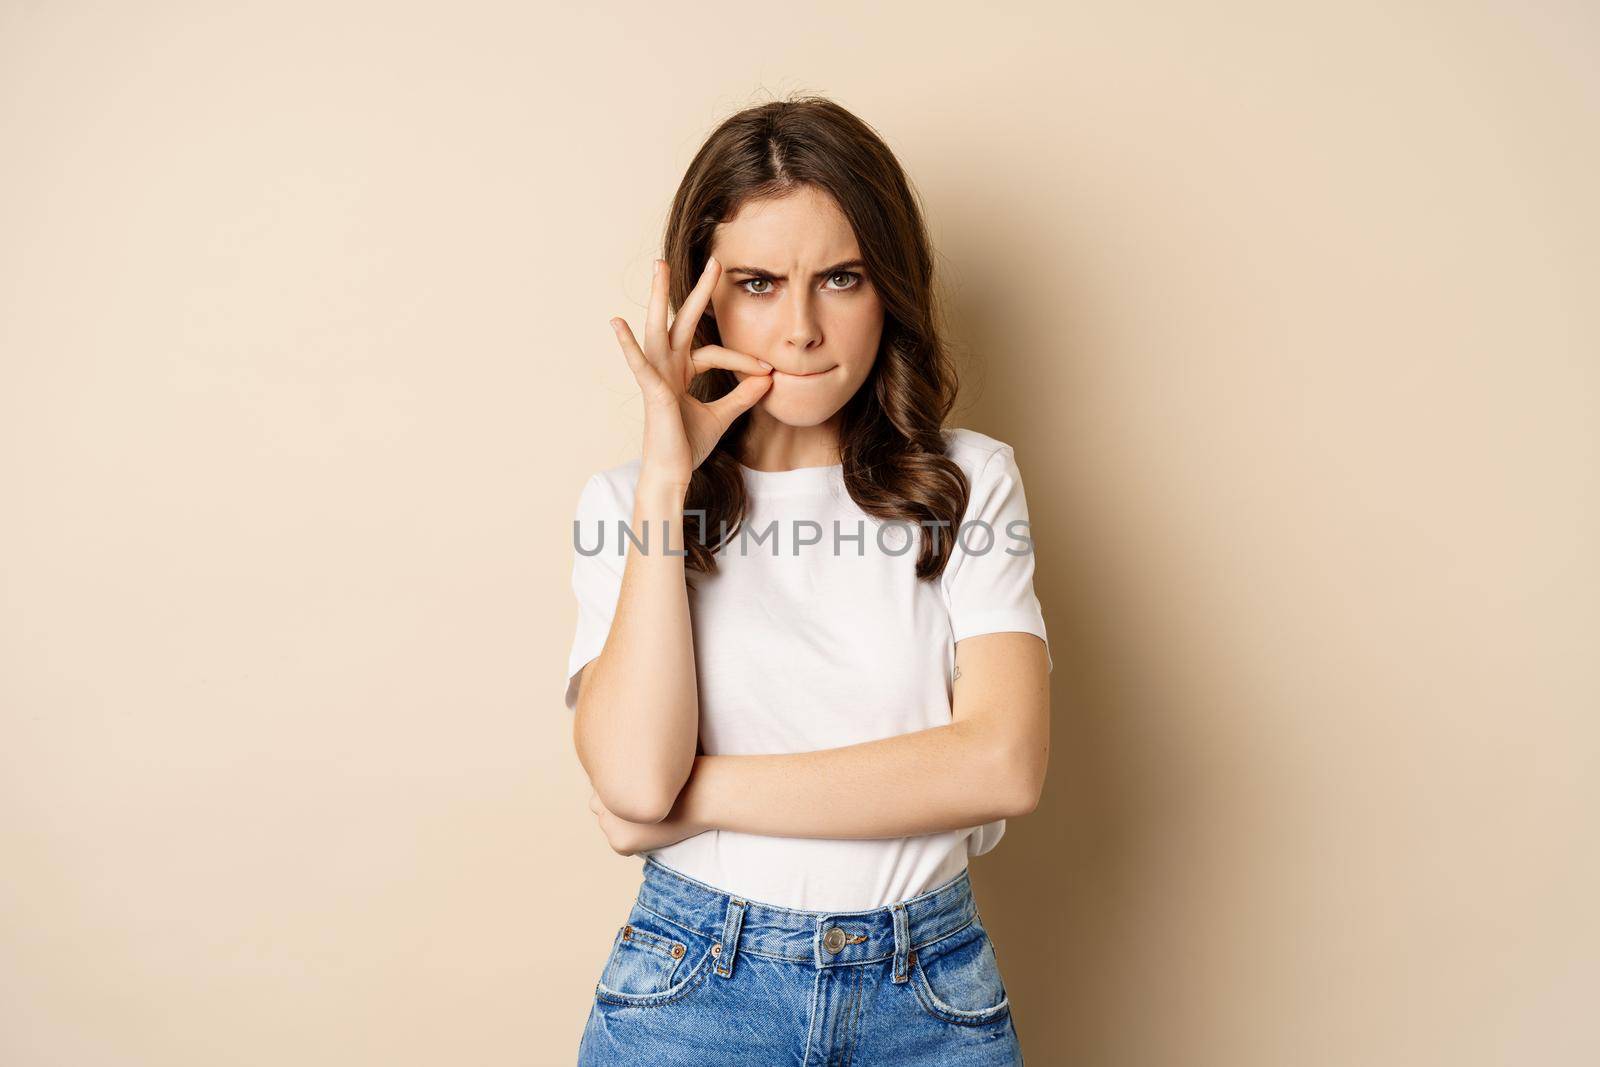 Young serious woman seal lips, showing zip mouth gesture, standing over beige background.